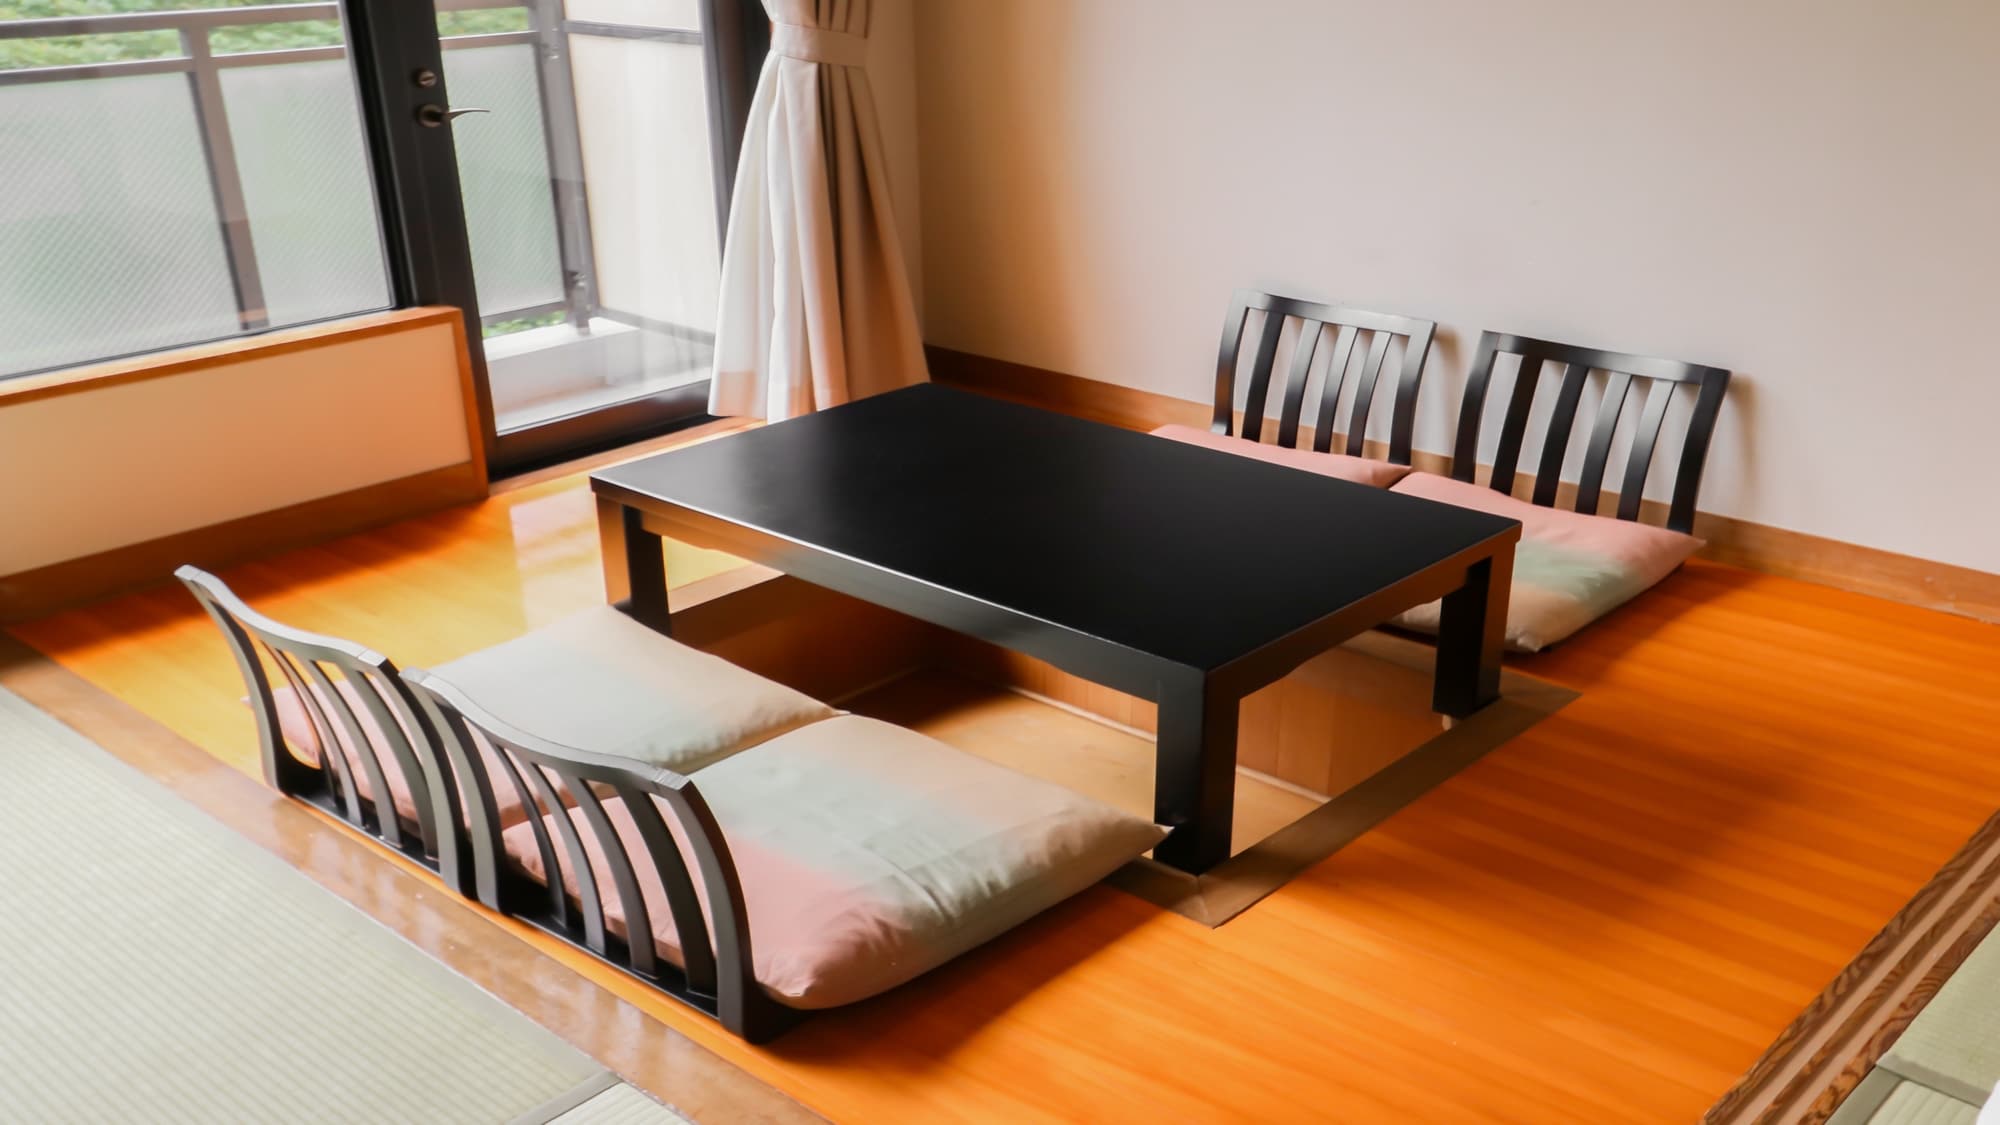 [Non-smoking] West Building Japanese and Western rooms 10 tatami mats + 4.5 tatami mats twin (with bath and toilet)